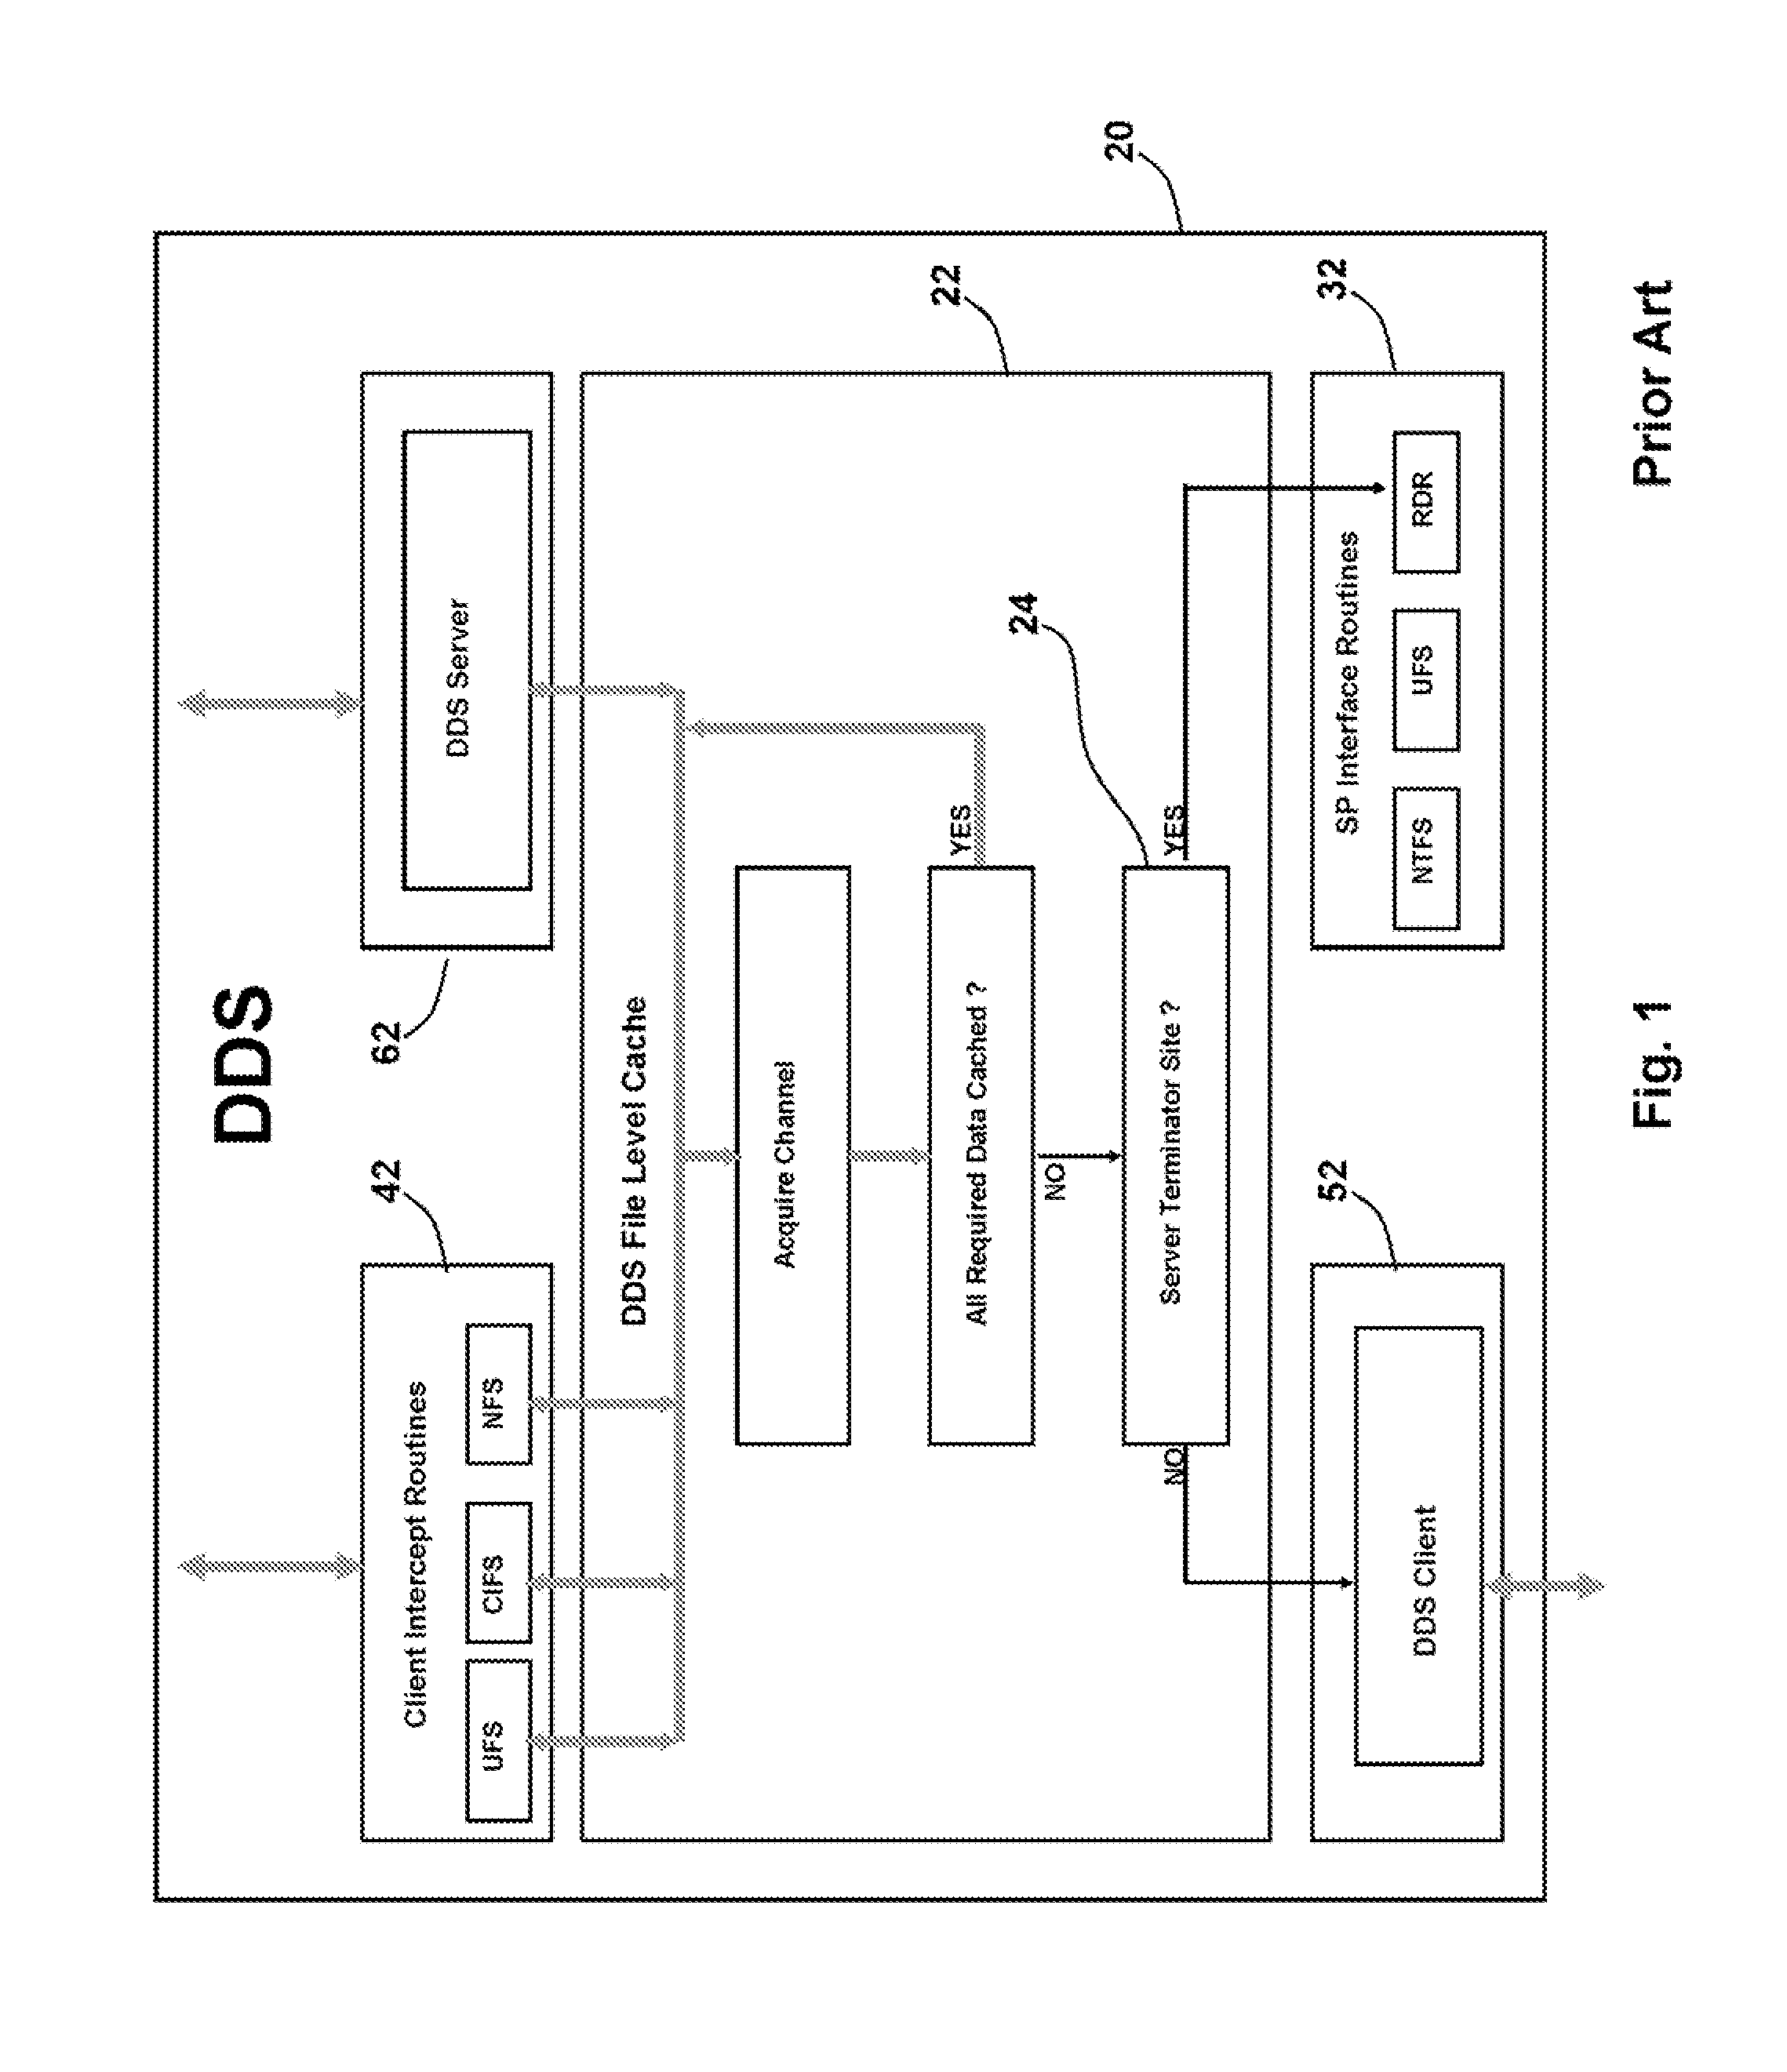 Distributed file system consistency mechanism extension for enabling internet video broadcasting